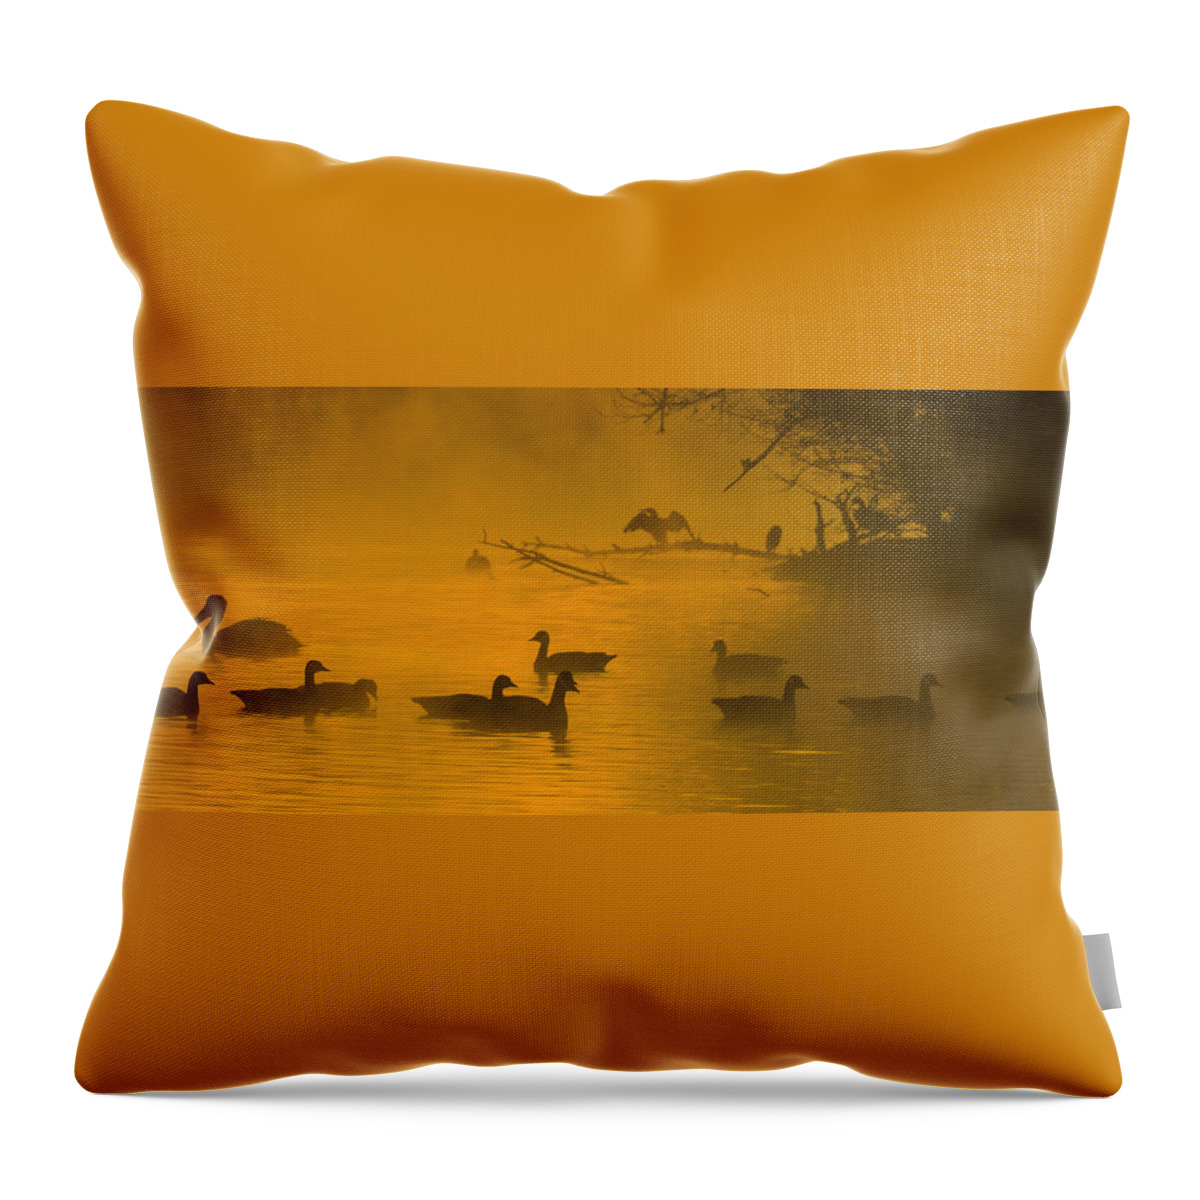 Los Angeles Throw Pillow featuring the photograph Sepulveda Dam Morning by Joe Doherty